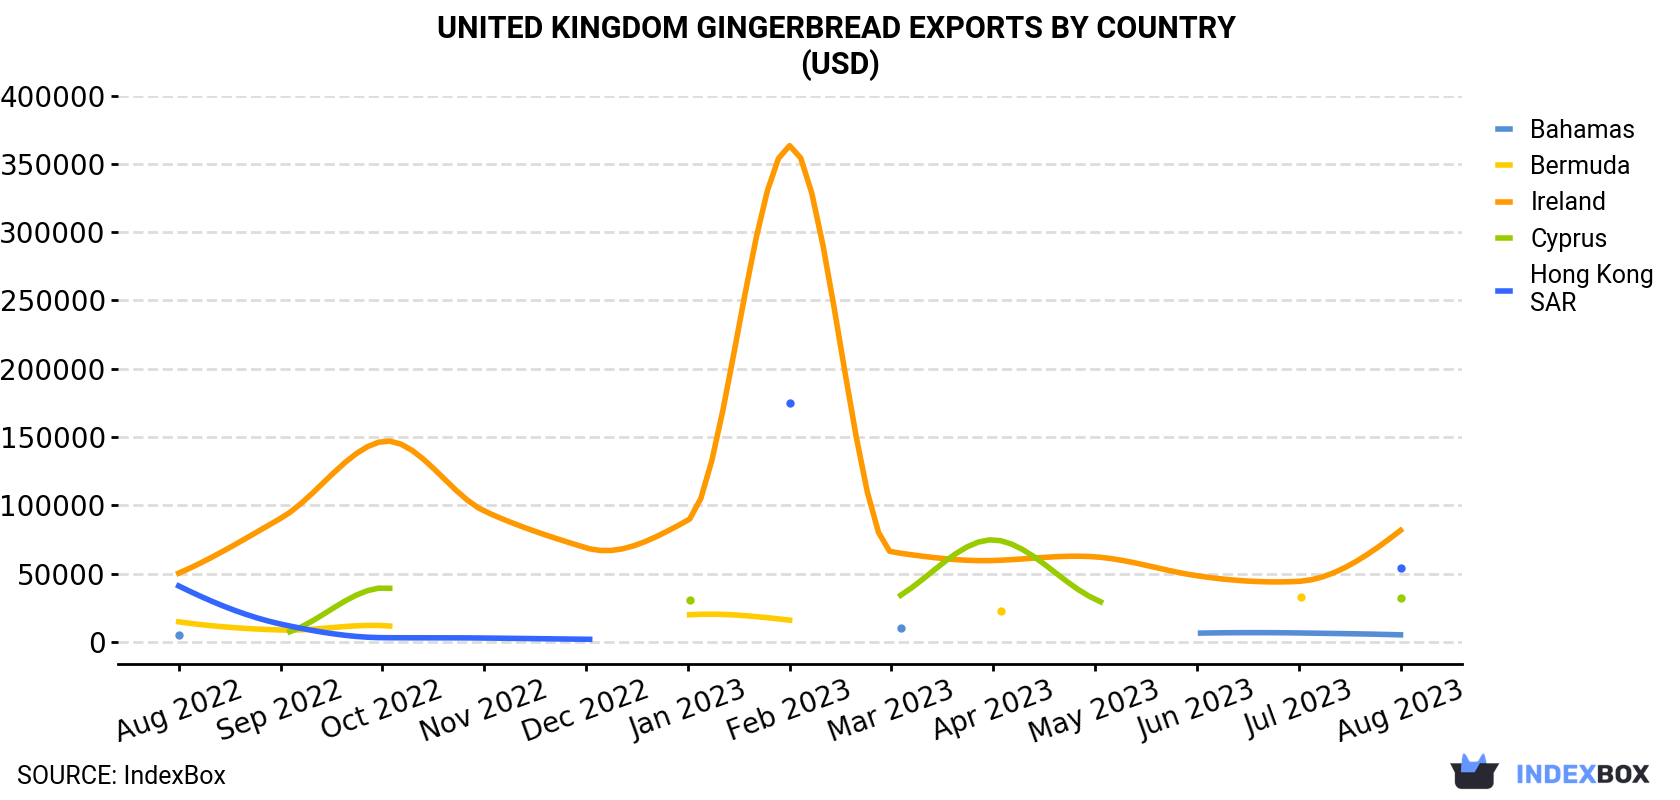 United Kingdom Gingerbread Exports By Country (USD)